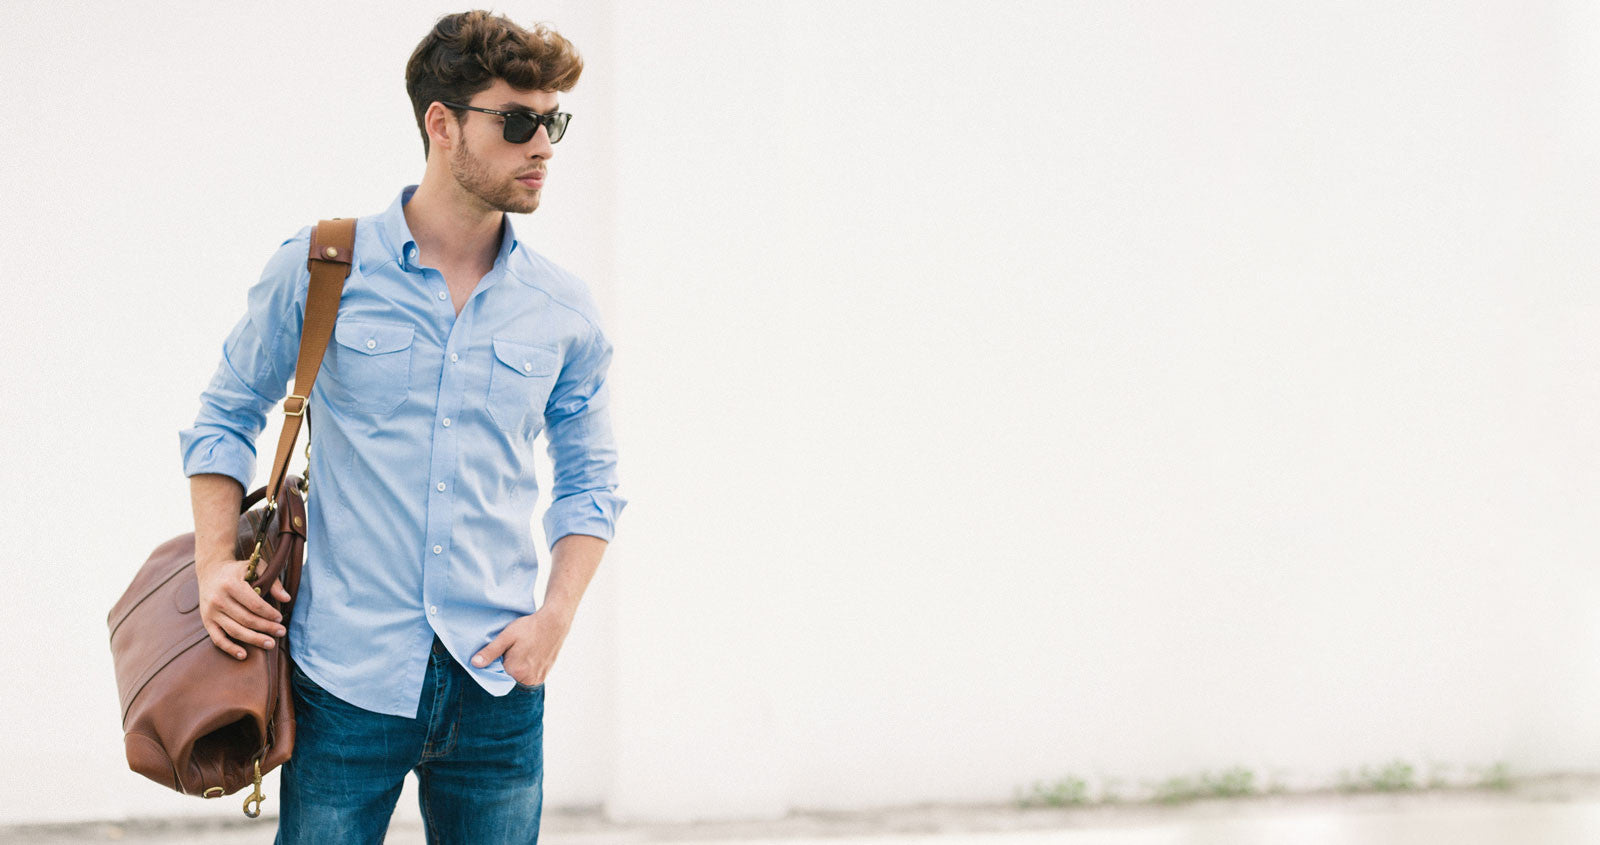 Men’s Utility Shirt Style Guide